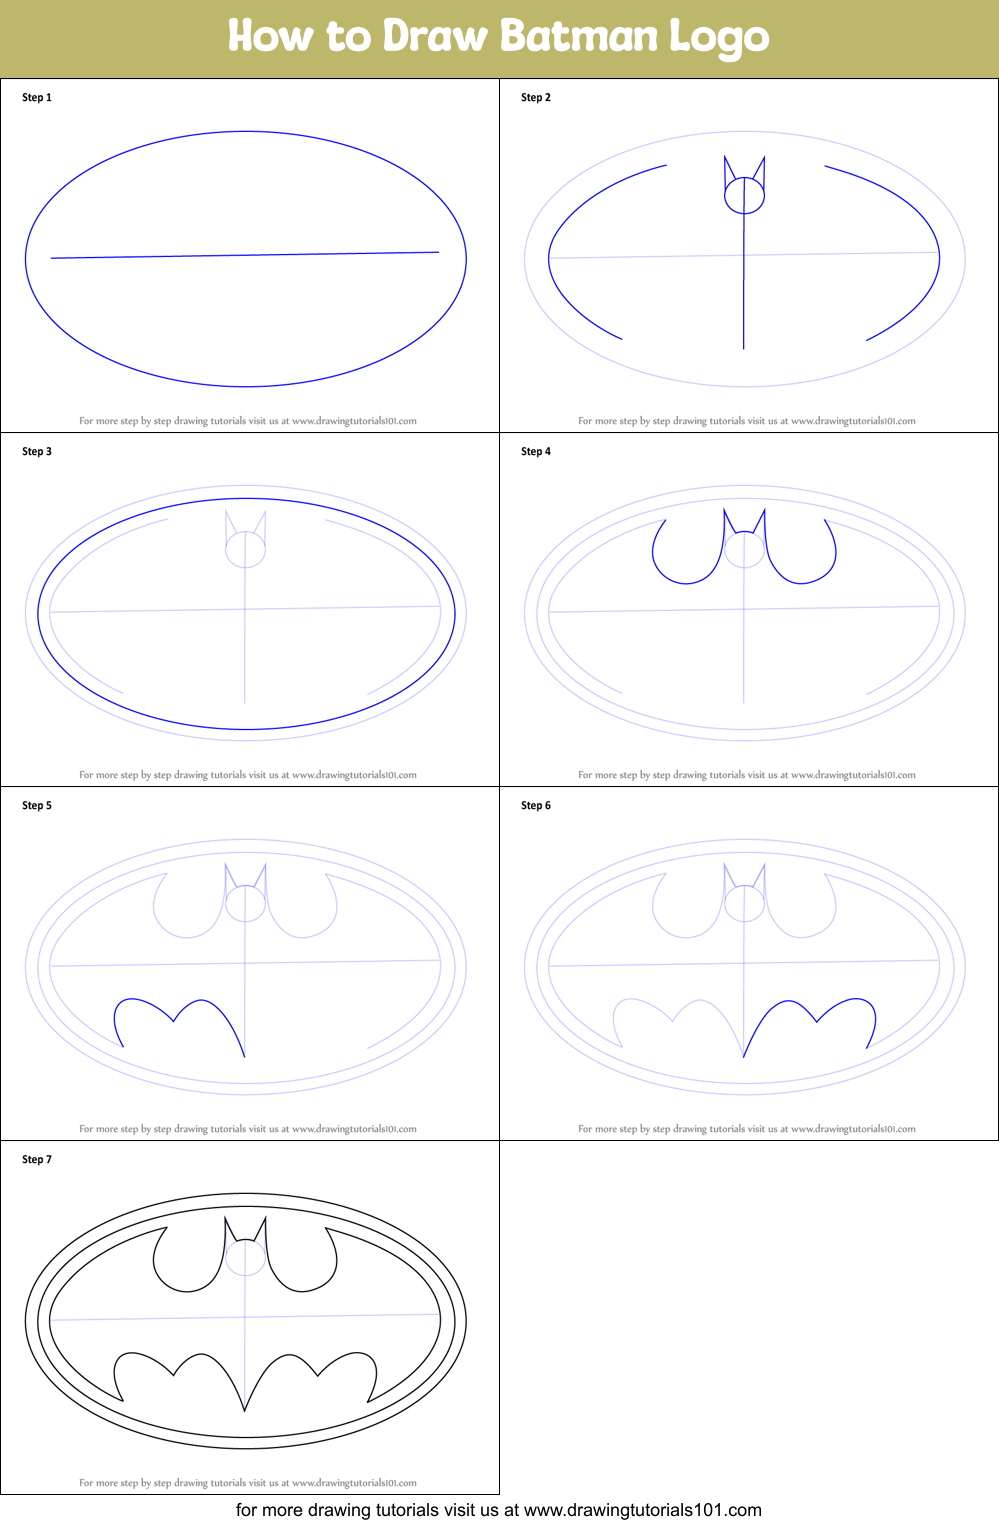 How to Draw Batman Logo printable step by step drawing sheet :  